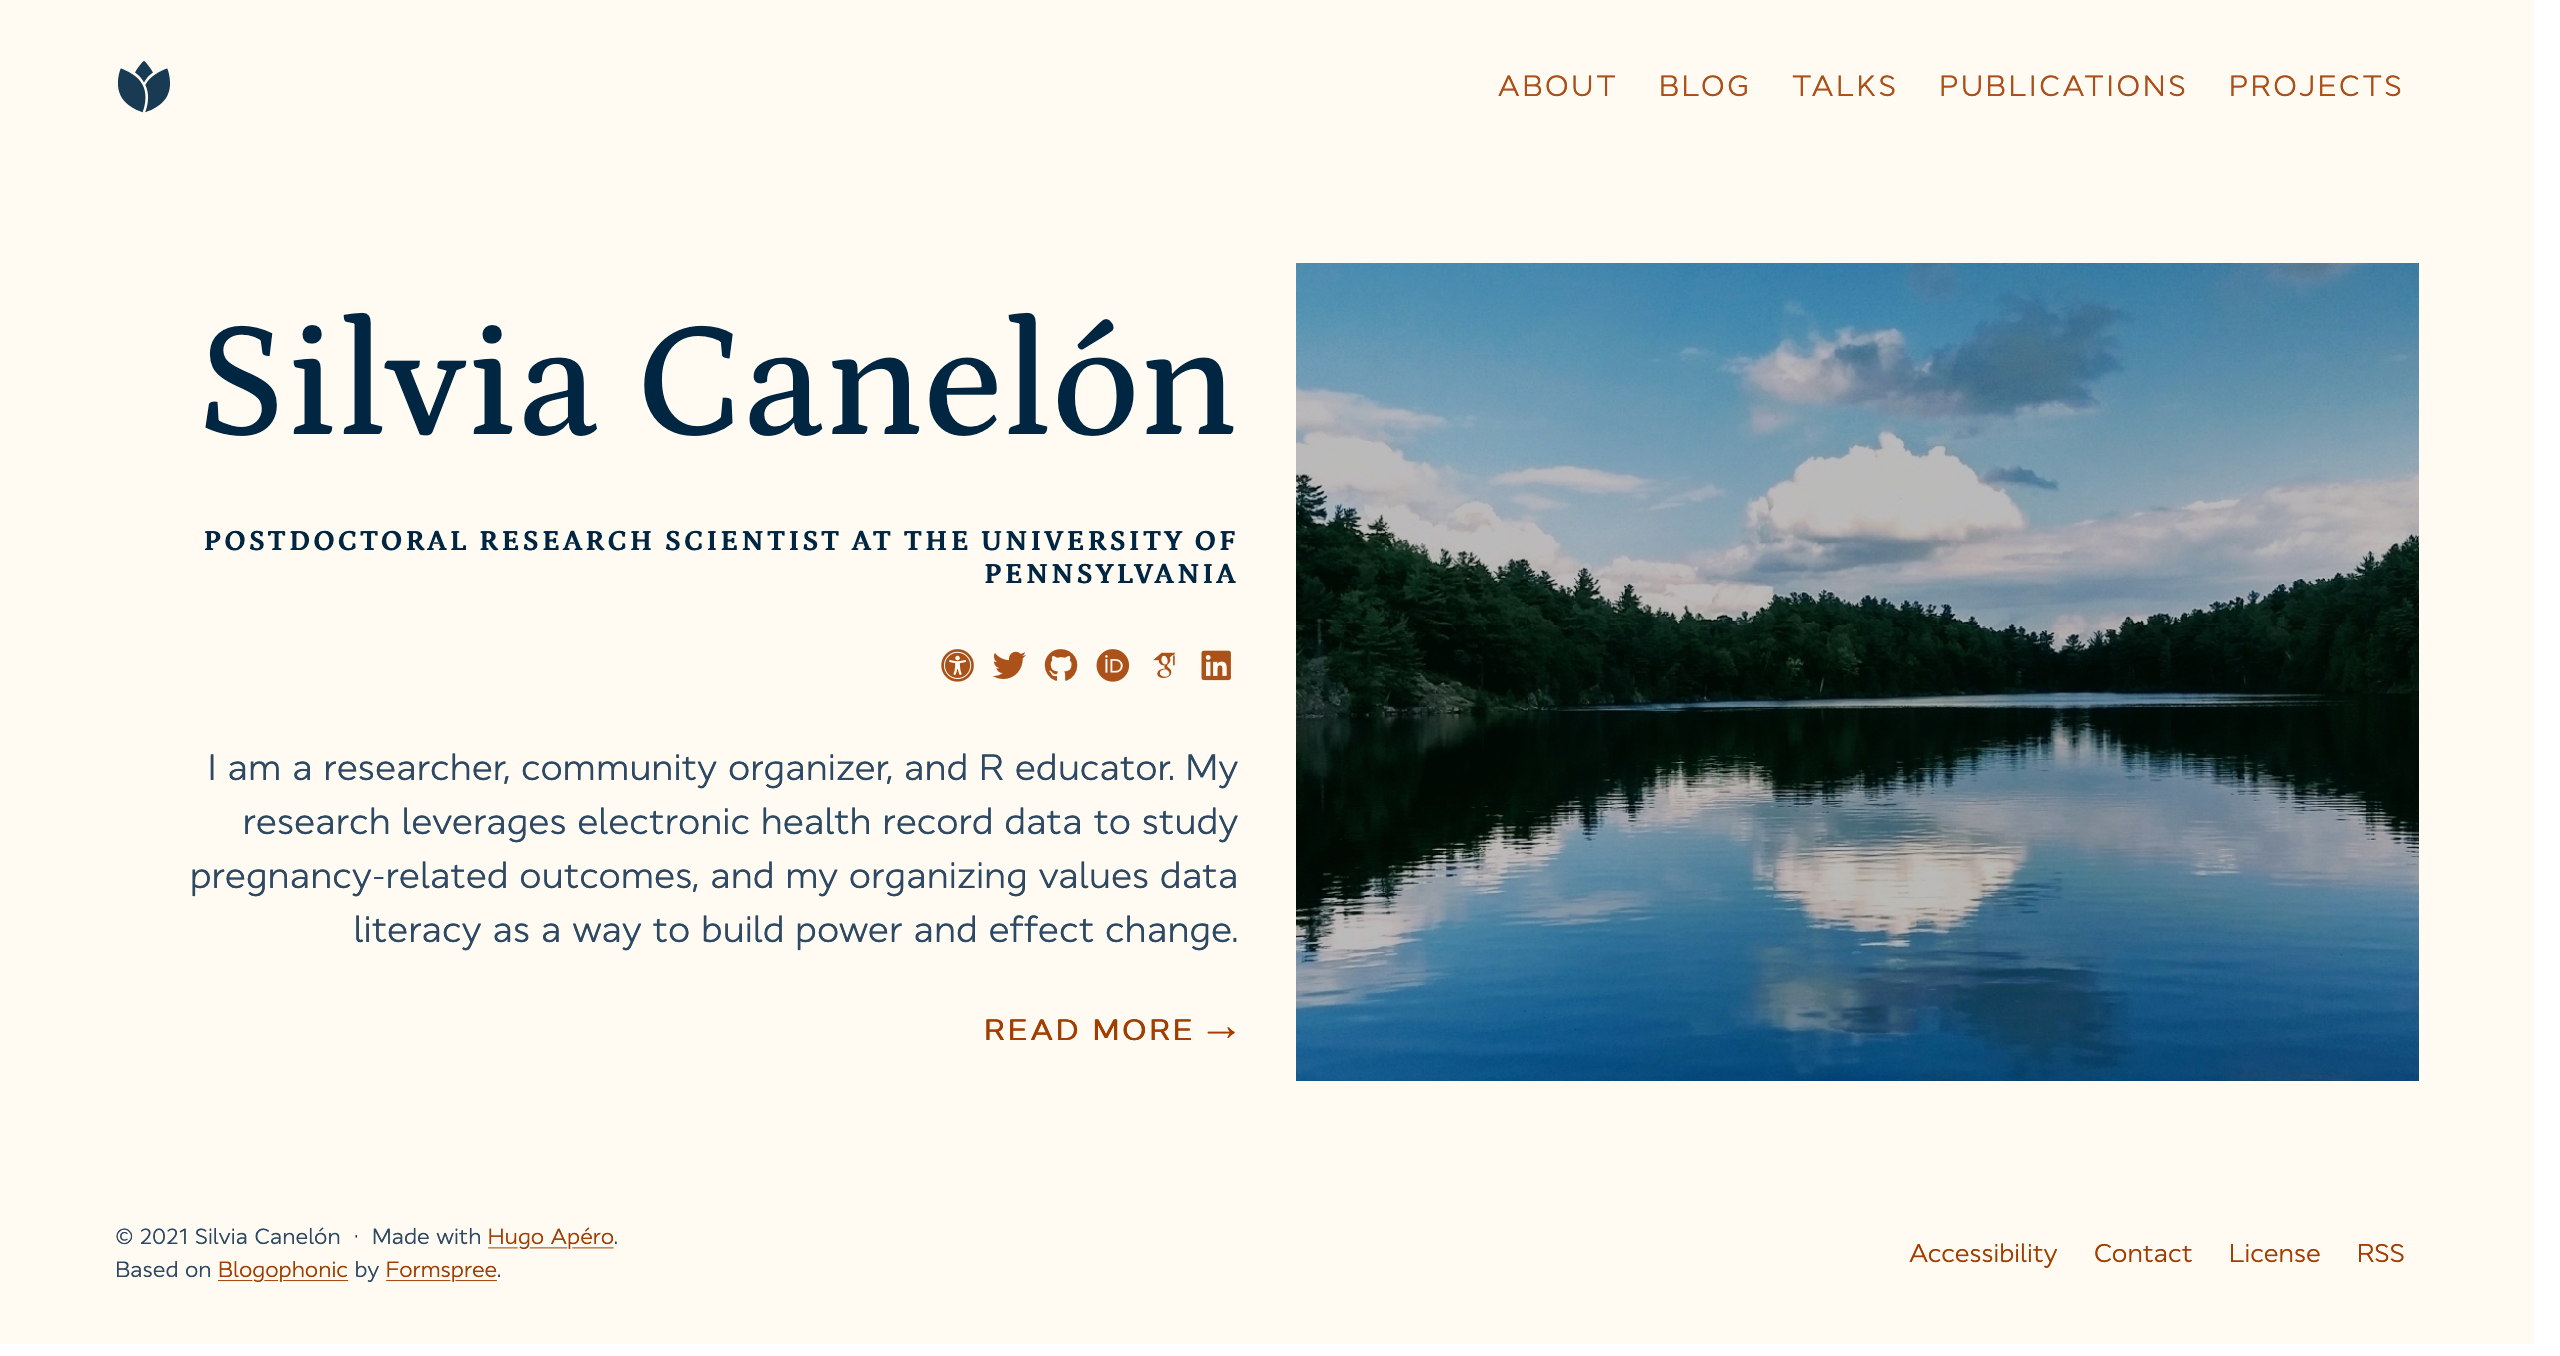 The homepage of my site which shows my name in large font on the left, my title, social media icons, a short blurb about me, and a link that says 'Read More' that can be clicked to enter the site. On the right side is a photo of one of my favorite lakes.